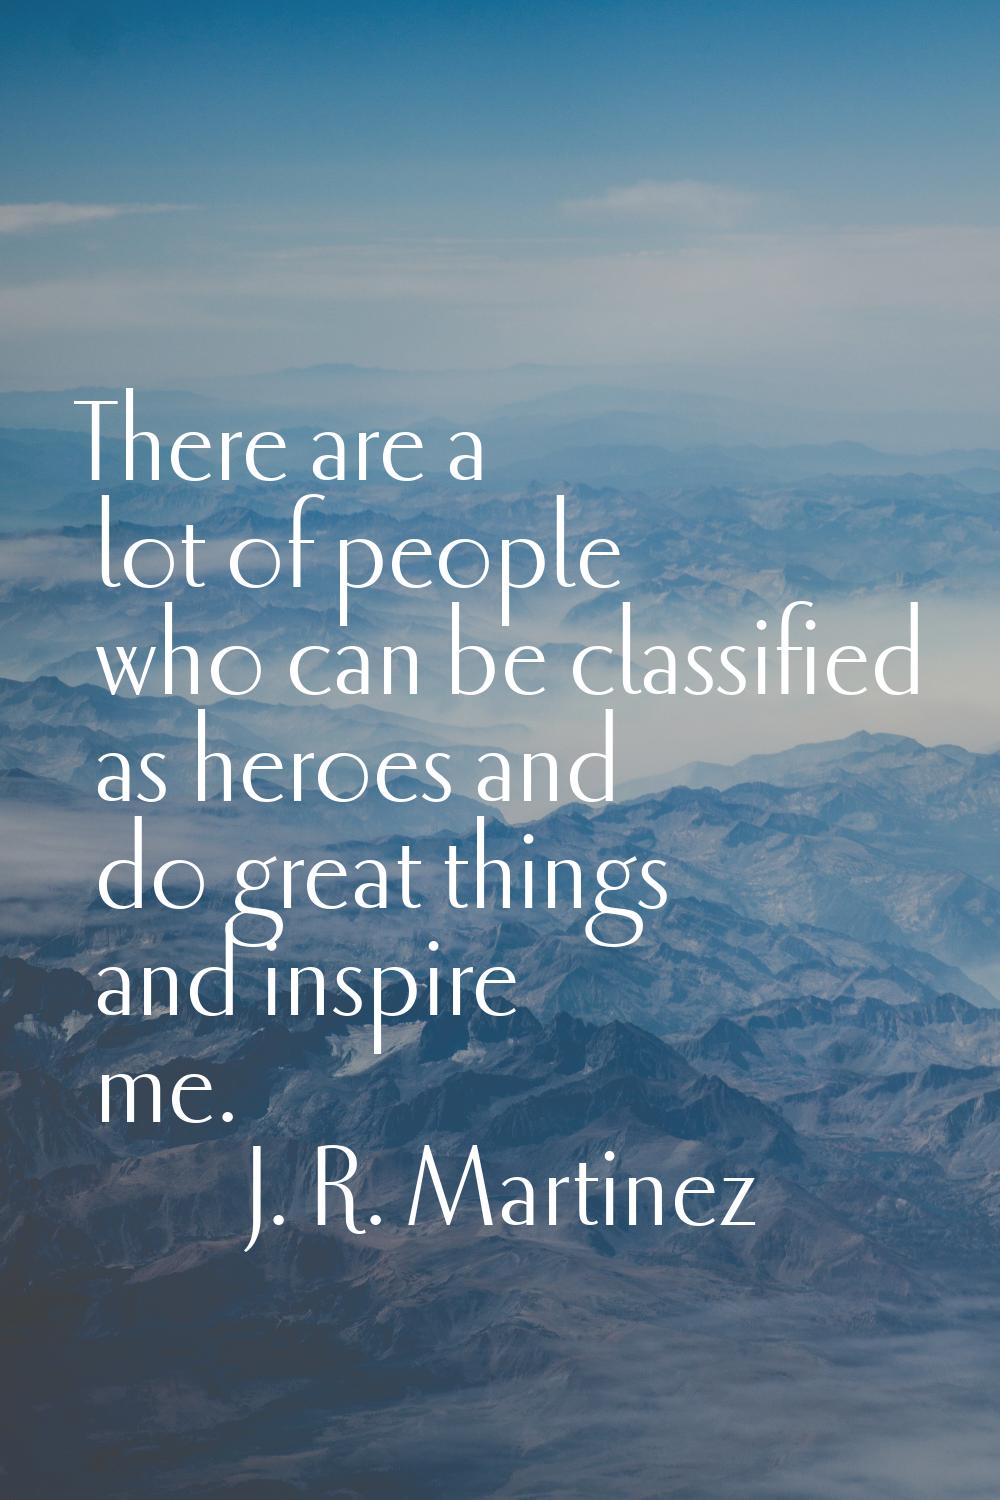 There are a lot of people who can be classified as heroes and do great things and inspire me.